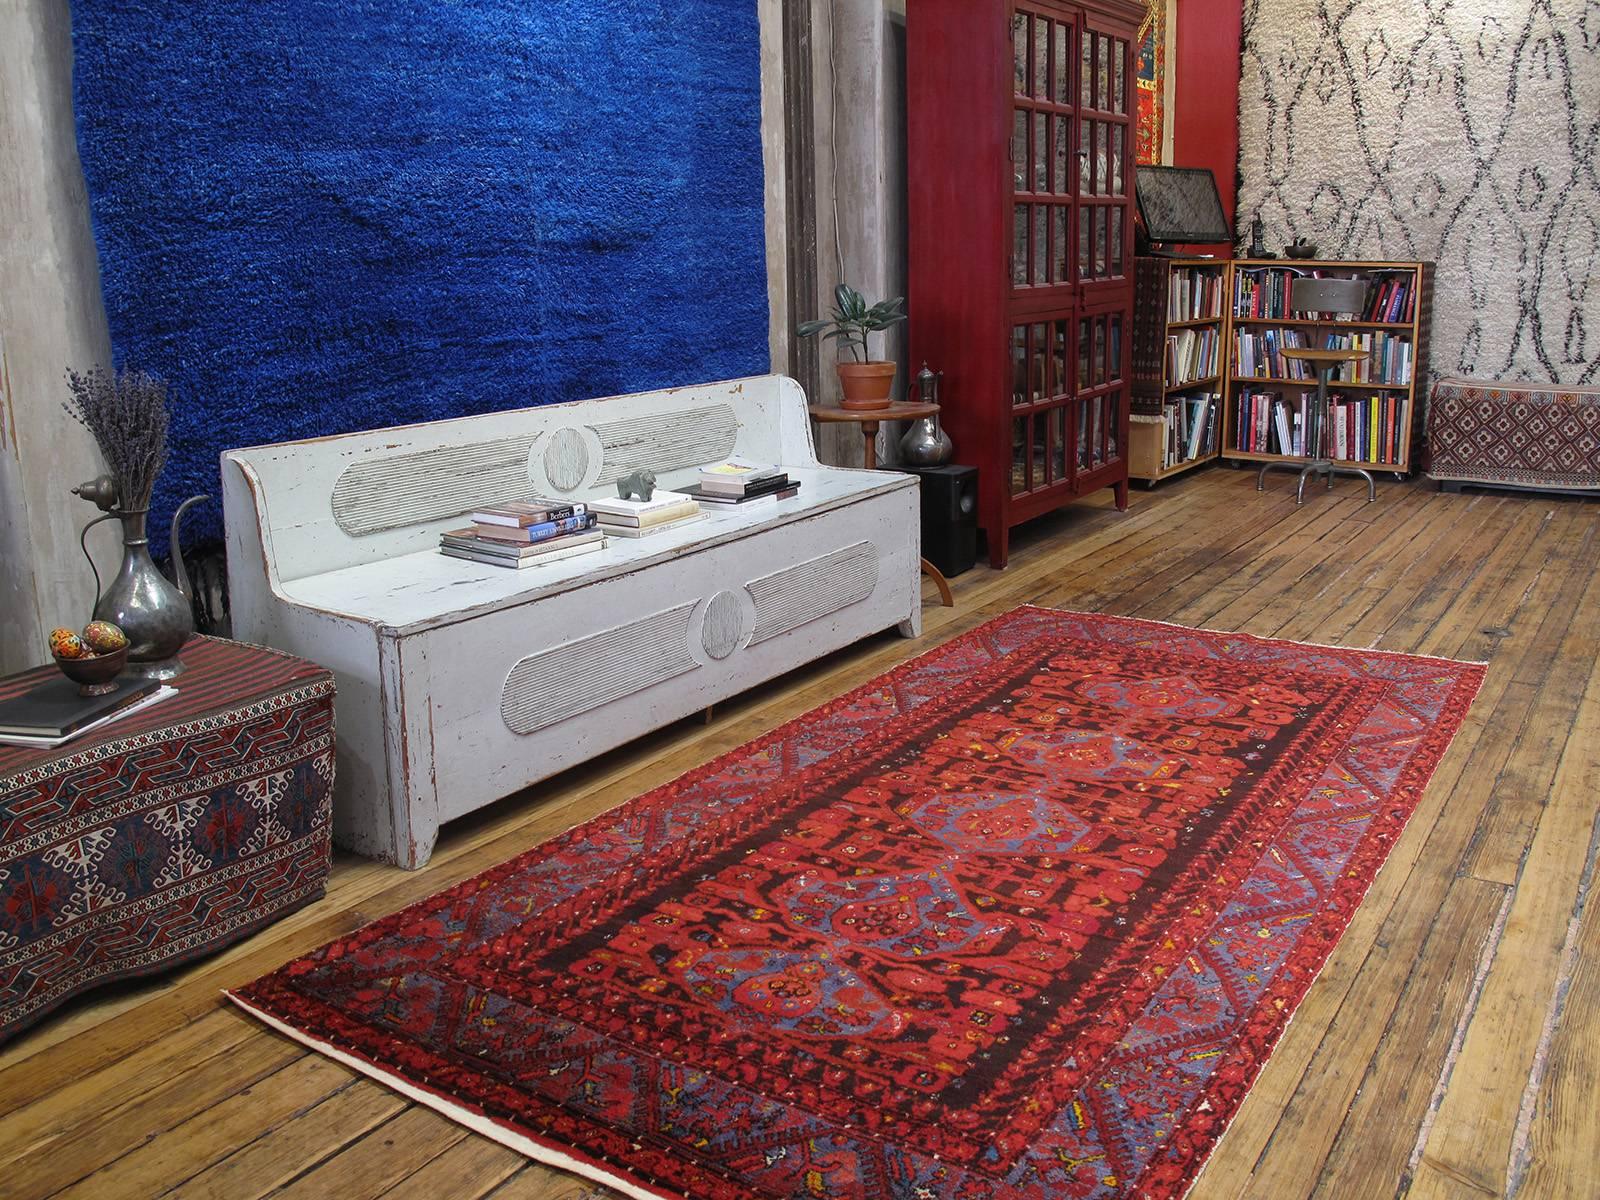 Kula Long rug. A lovely old example of this well-known type of rug from Kula, one of the most prolific weaving centers of Western Turkey. With tulips and carnations and a profusion of other stylized floral forms, these rugs are direct descendants